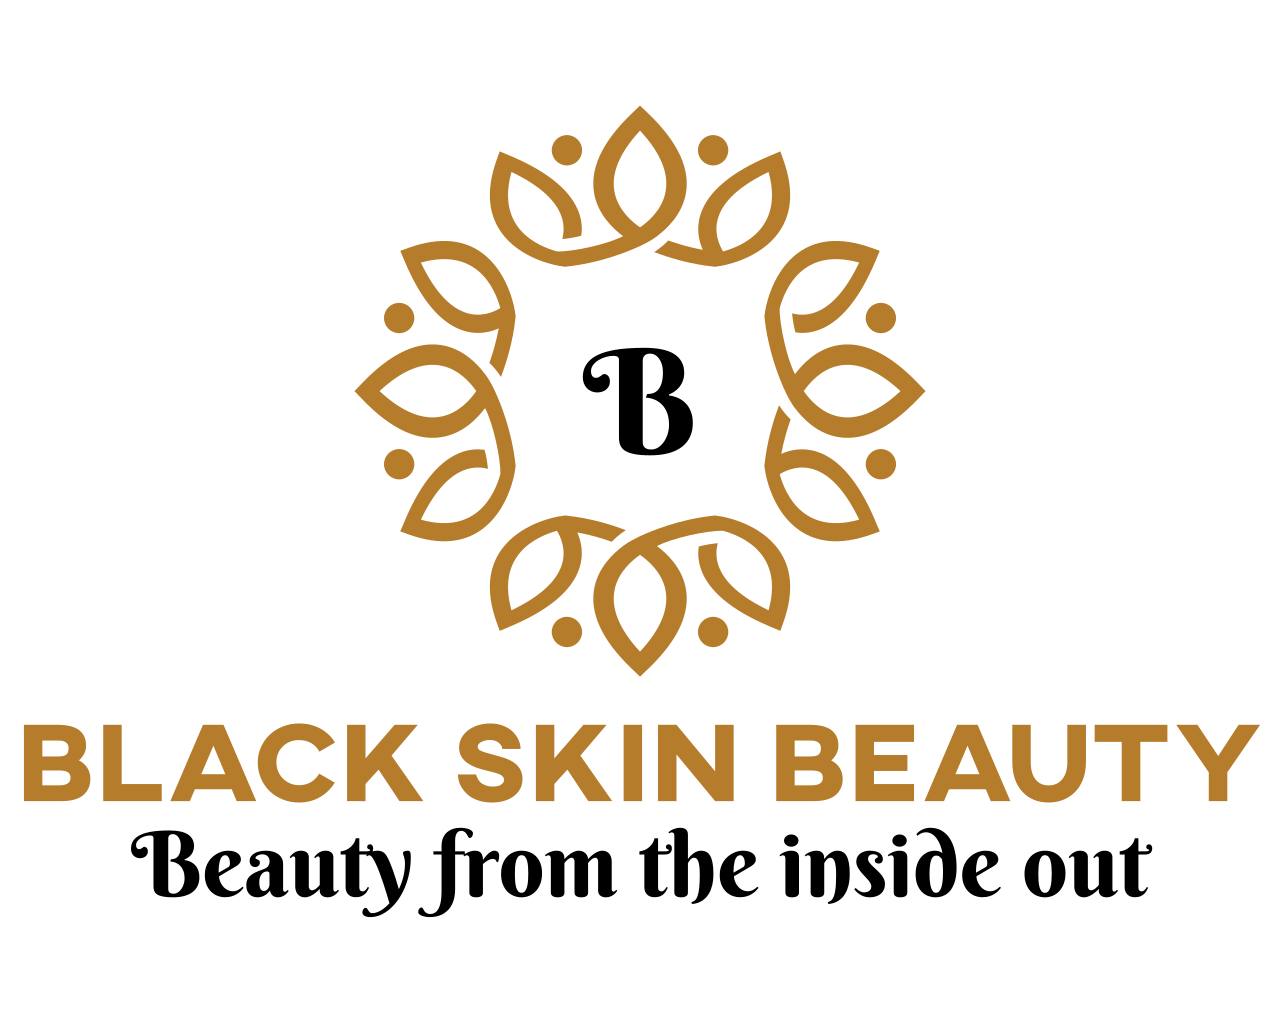 New Natural Skincare Brand Black Skin Beauty Celebrates Inner Beauty and Diversity in Skin Color